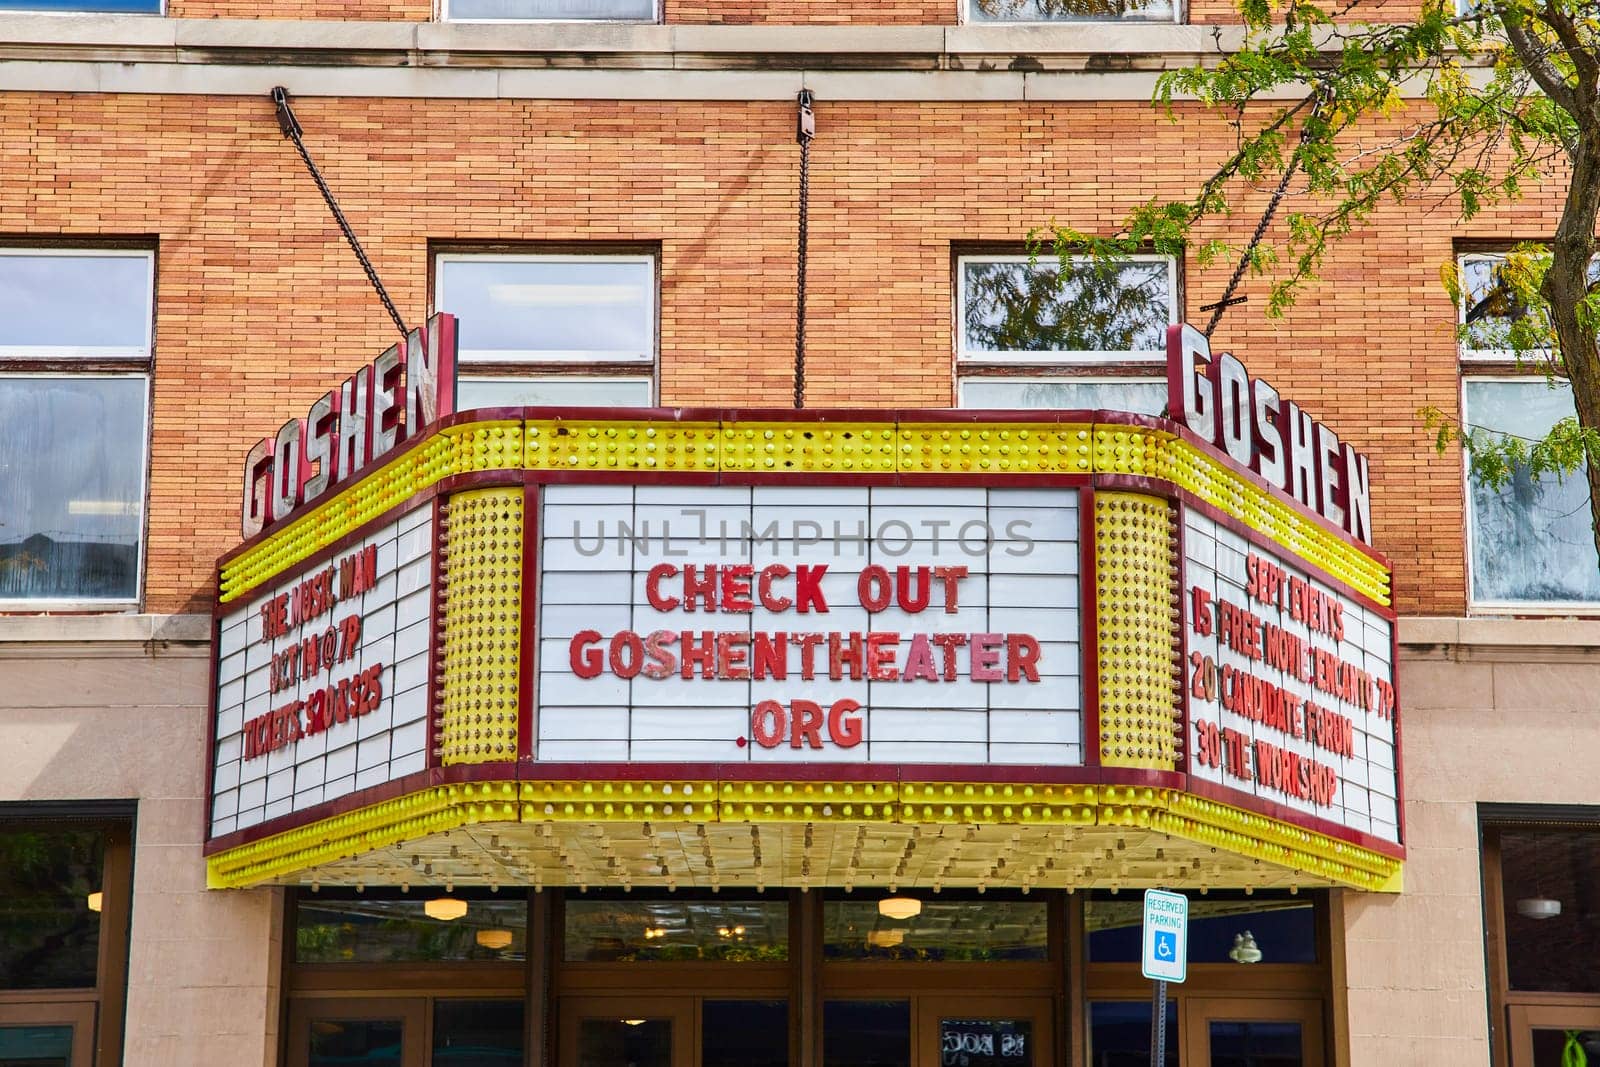 Image of Goshen theater sign and front entrance on bright, sunny summer day, Indiana